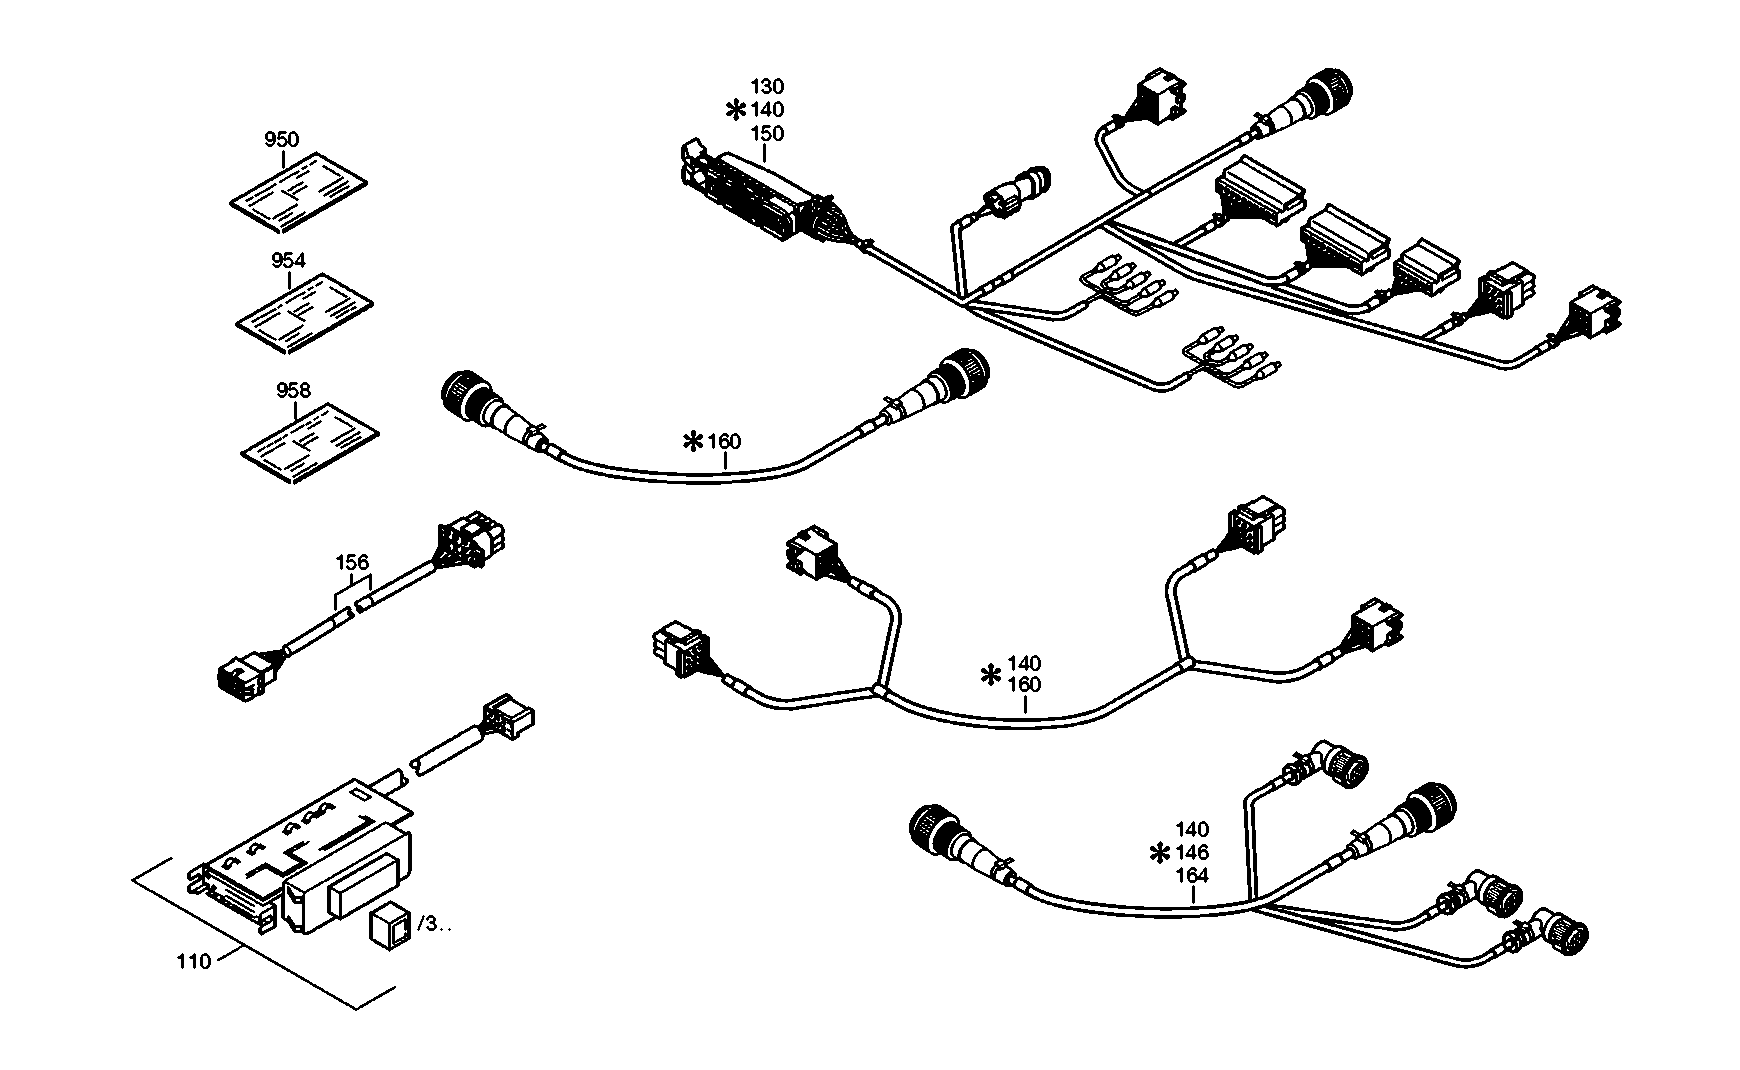 drawing for NORTH AMERICAN BUS INDUSTRIES INC. 10B-2100-004 - PERIPHERALS (figure 1)